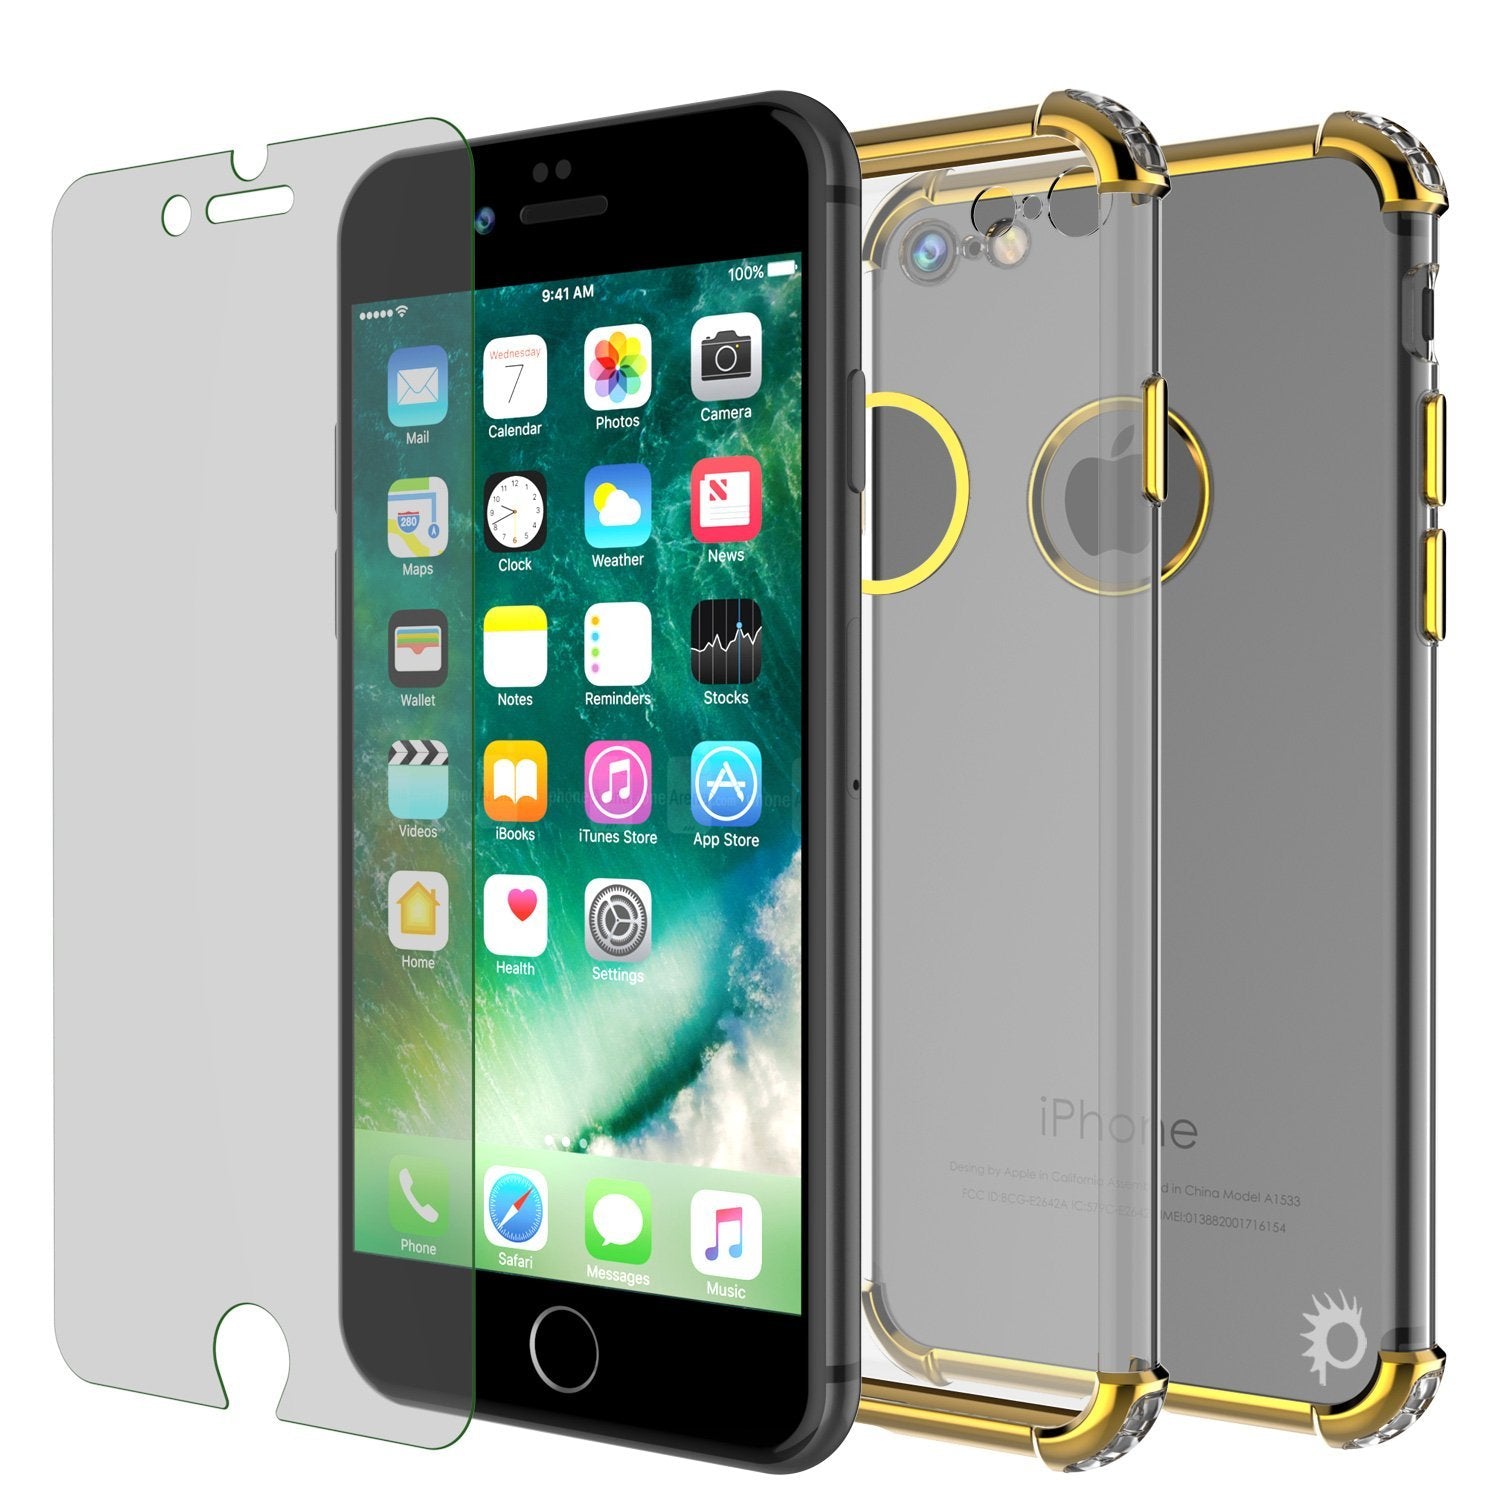 iPhone SE (4.7") Case, Punkcase [BLAZE SERIES] Protective Cover W/ PunkShield Screen Protector [Shockproof] [Slim Fit] for Apple iPhone [Gold]